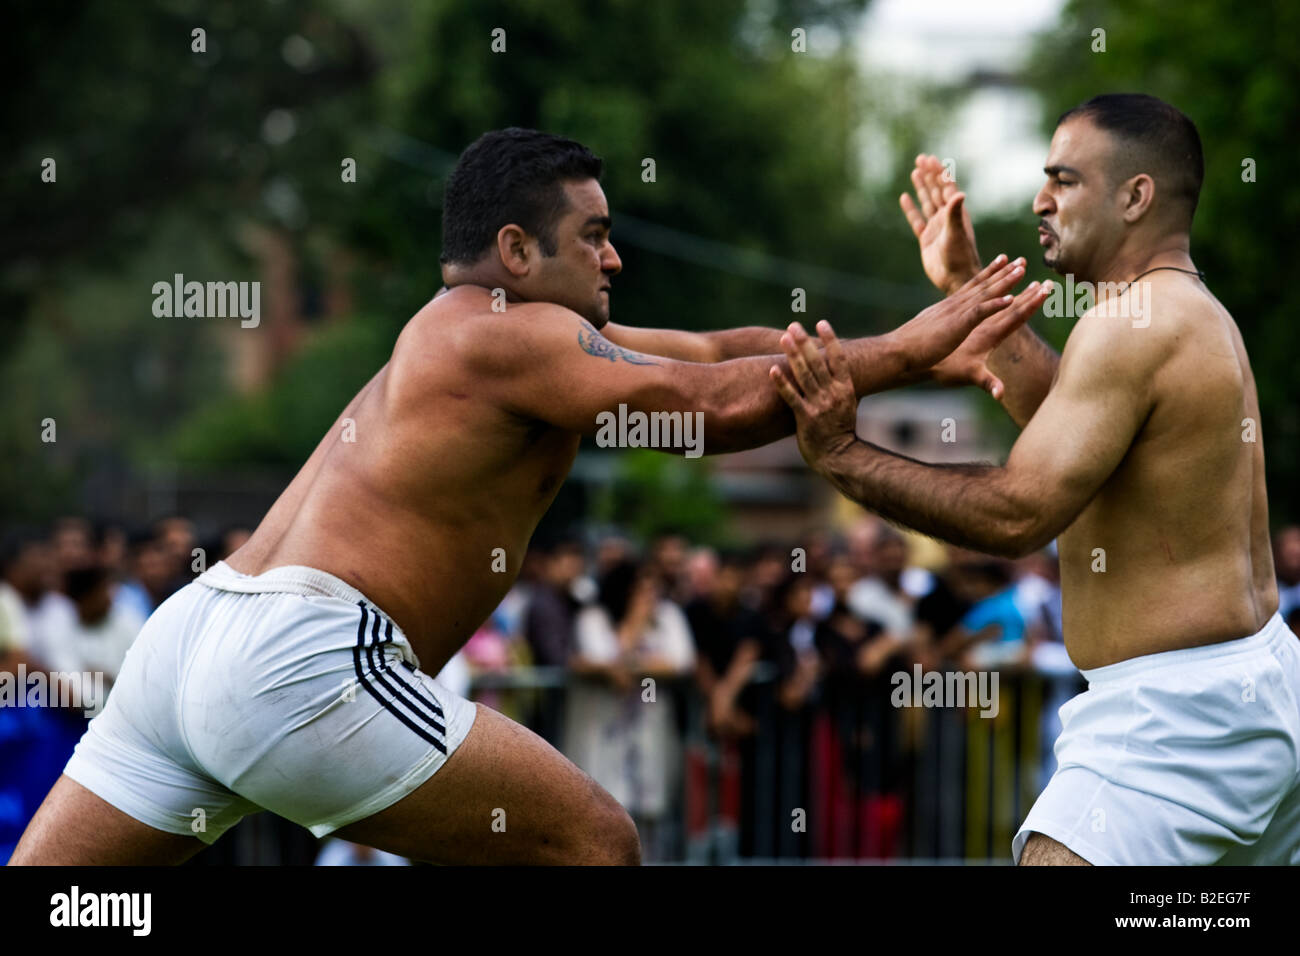 Two Kabbadi players struggle together at a match between Birmingham and Manchester. Stock Photo